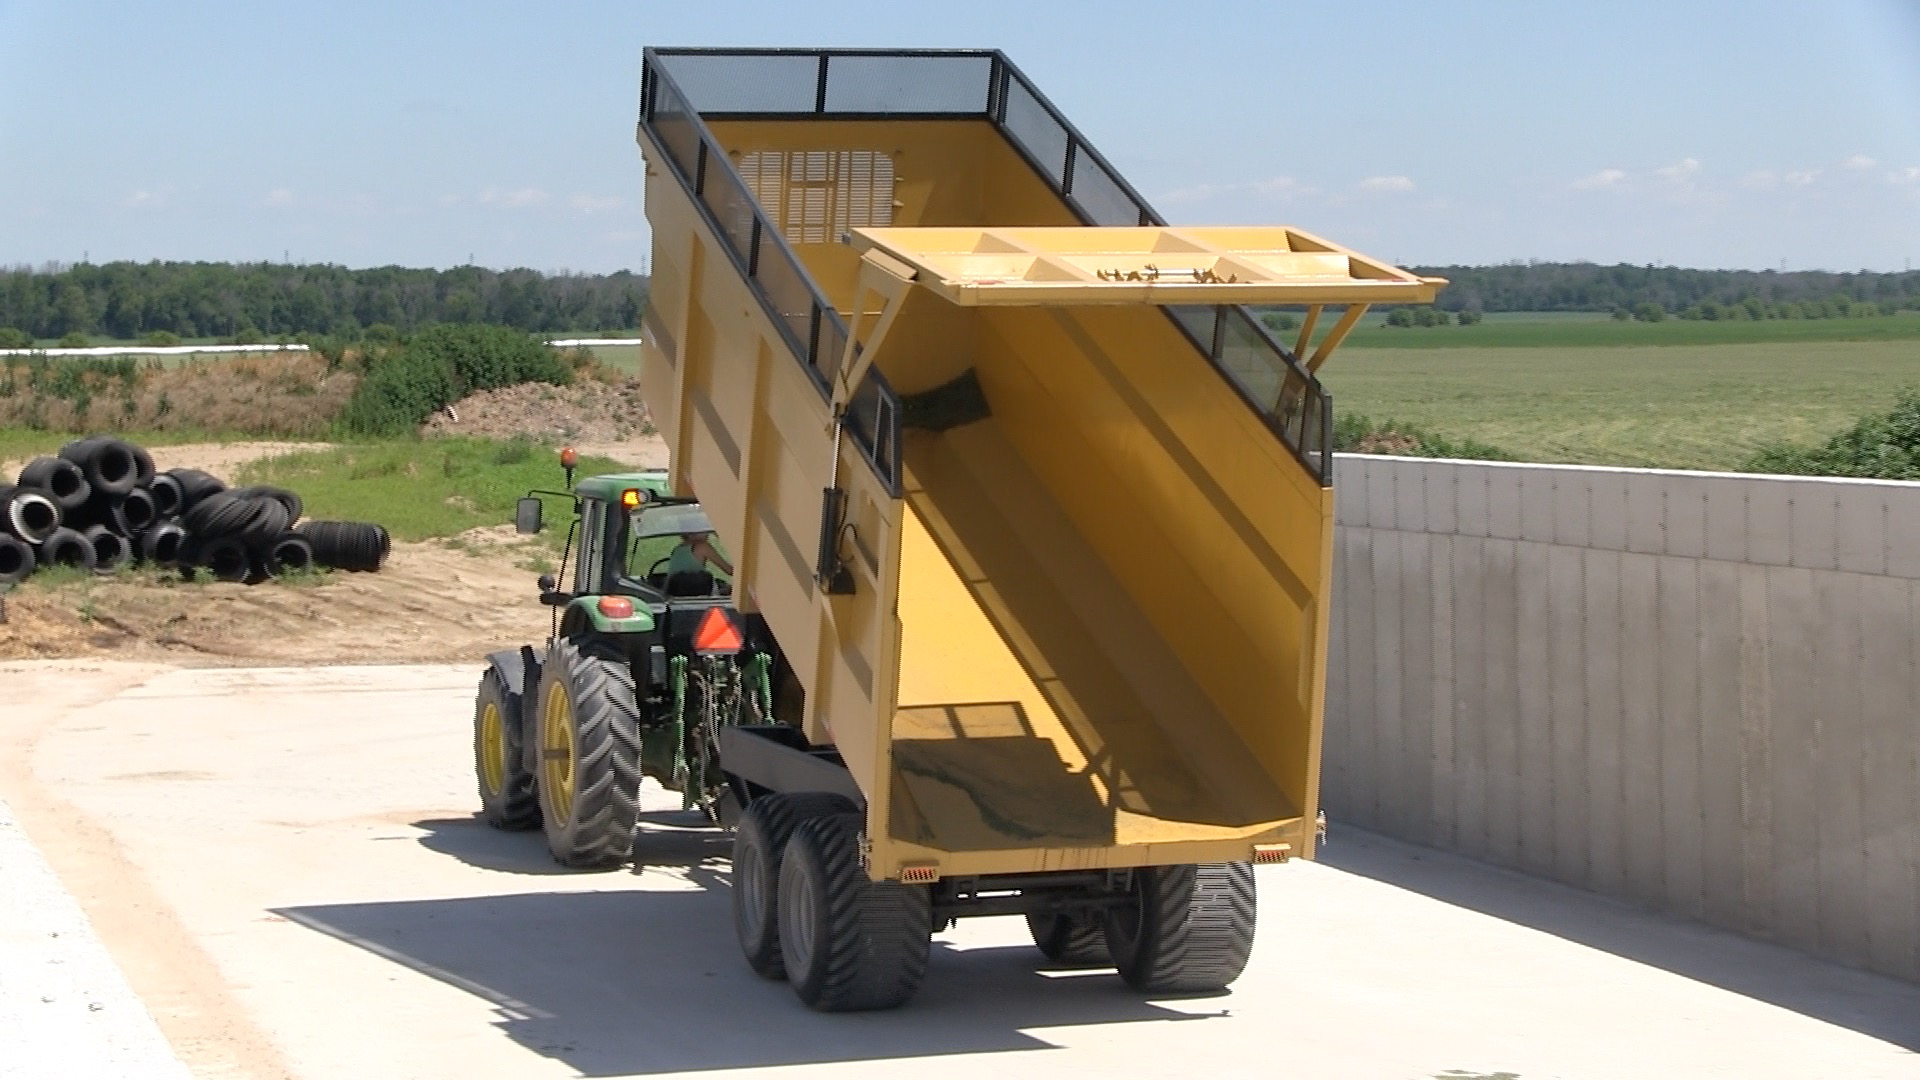 An image of the 20 ton silage dump trailer lifted up